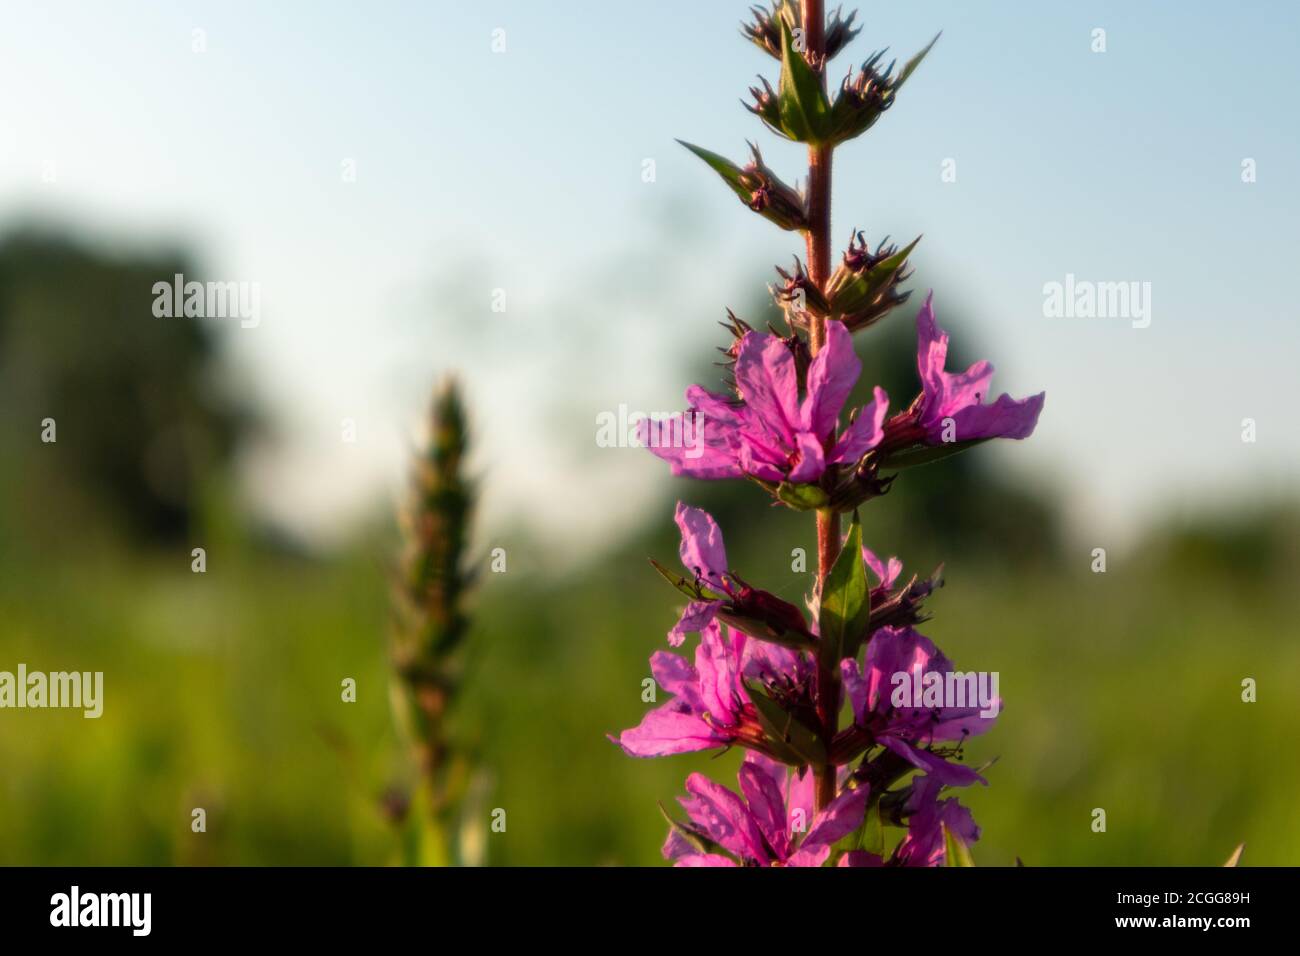 Lythrum salicaria, or purple loosestrife, flowering plant blooming close-up, Lythraceae family. Pink wild flowers in sunset light on green grass lawn Stock Photo